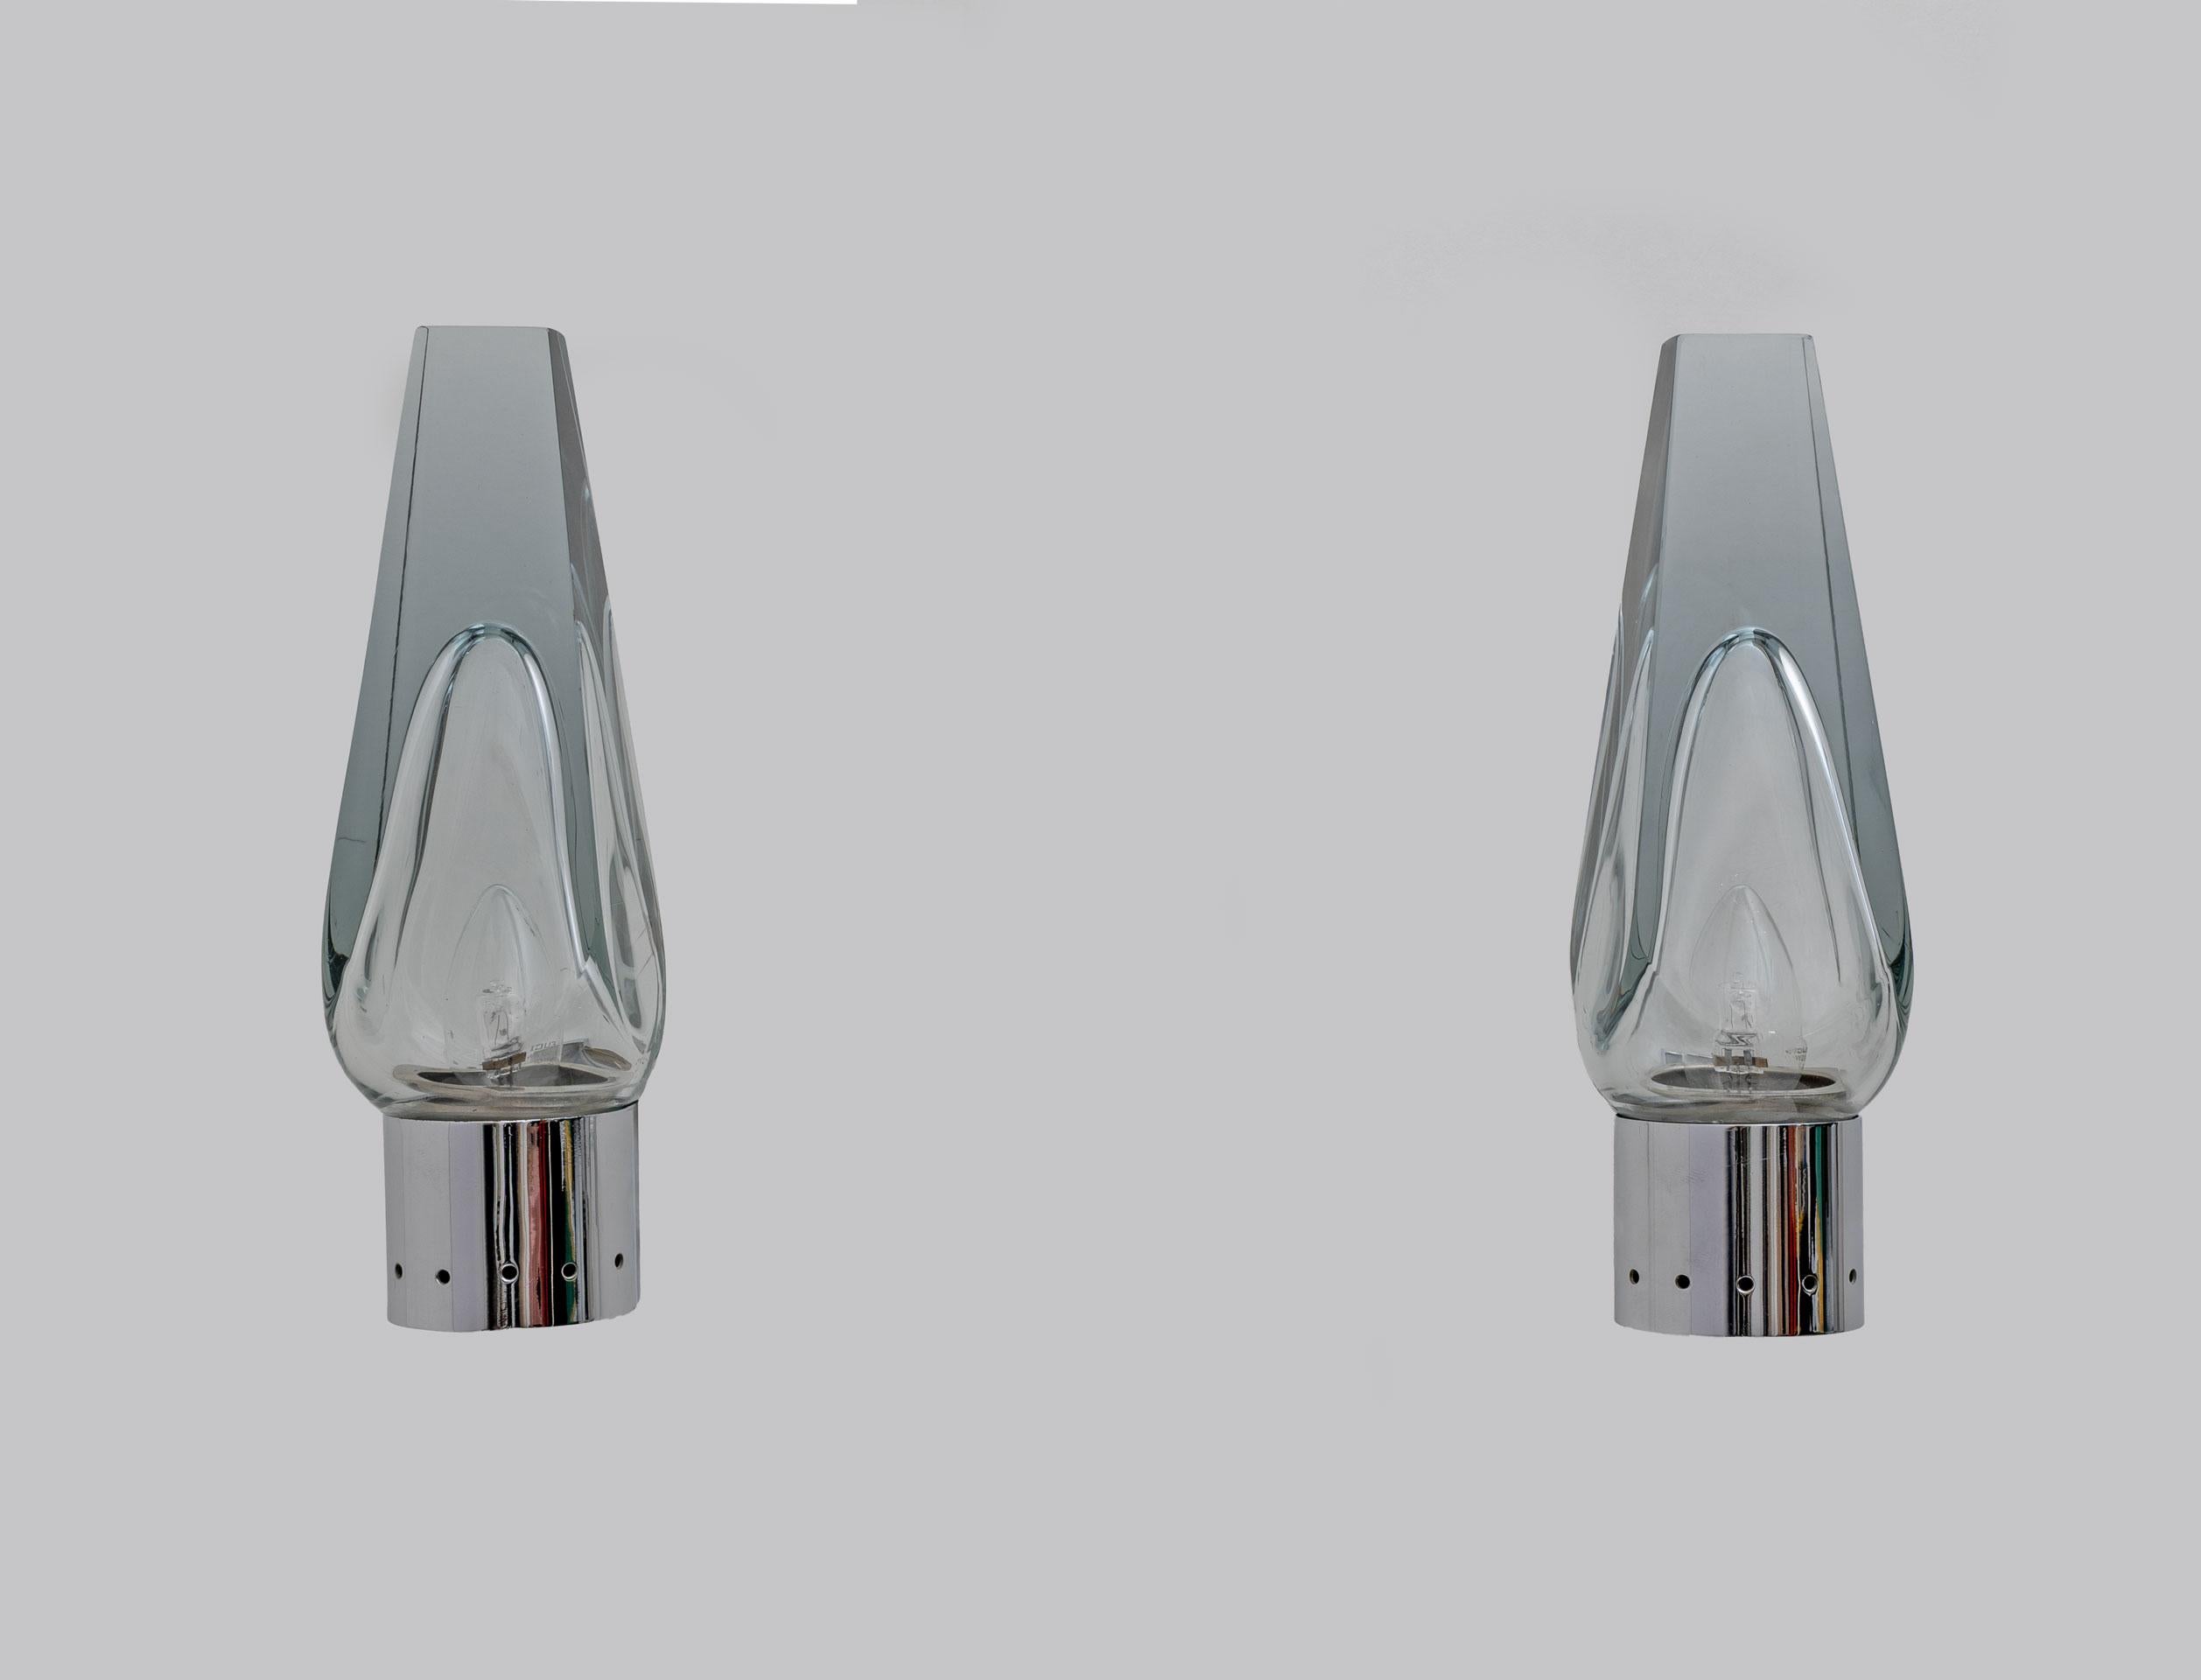 Italian Pair of Mid-century Modern Murano Glass Sconces by Flavio Poli for Seguso, 1960s For Sale